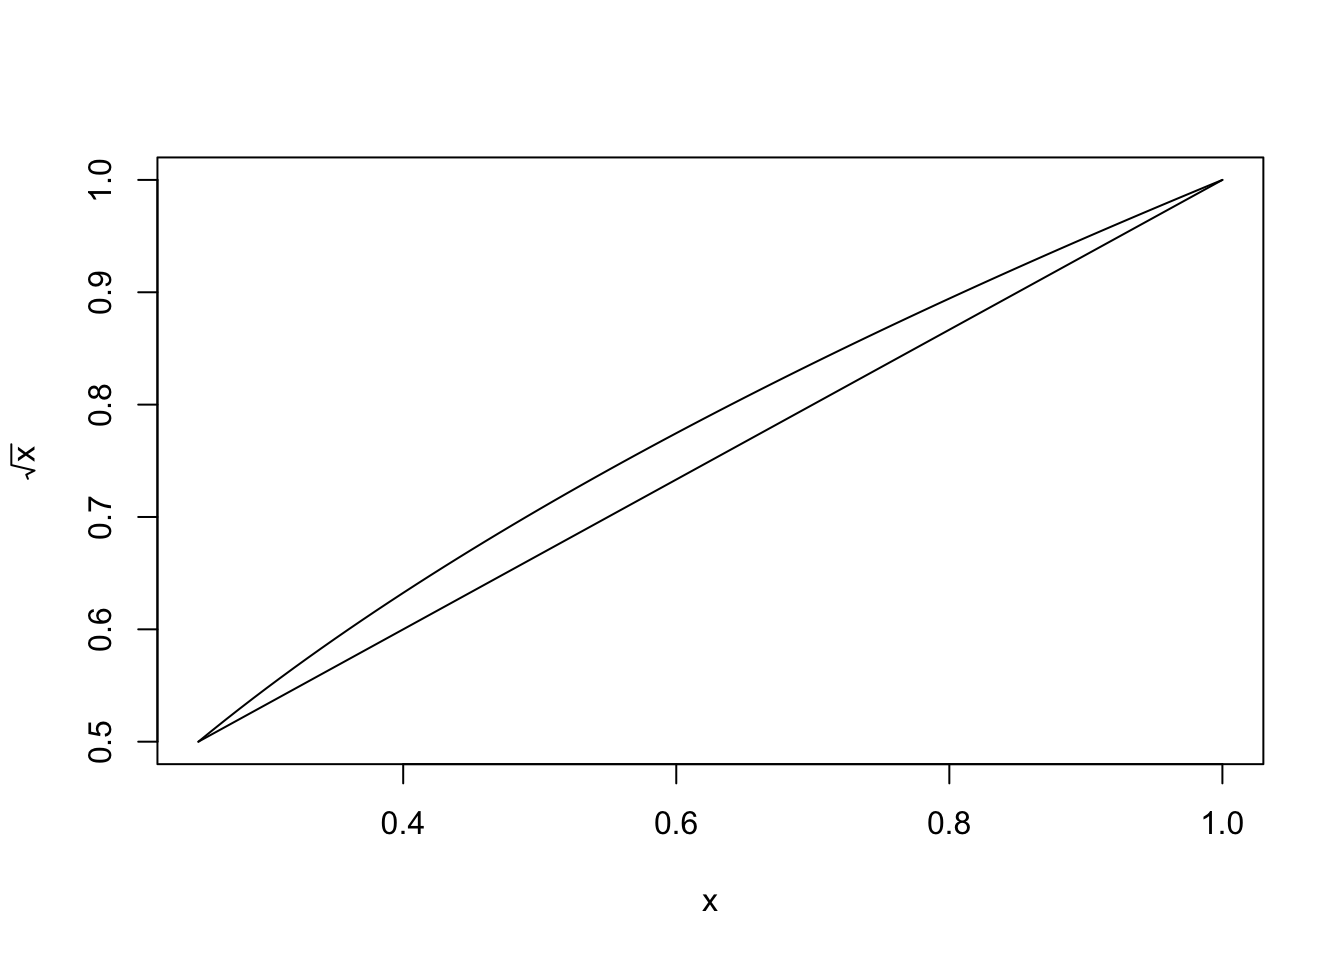 Linear interpolation of $f(x) = \sqrt{x}$ at $x_0 = 1/4$ and $x_1 = 1$